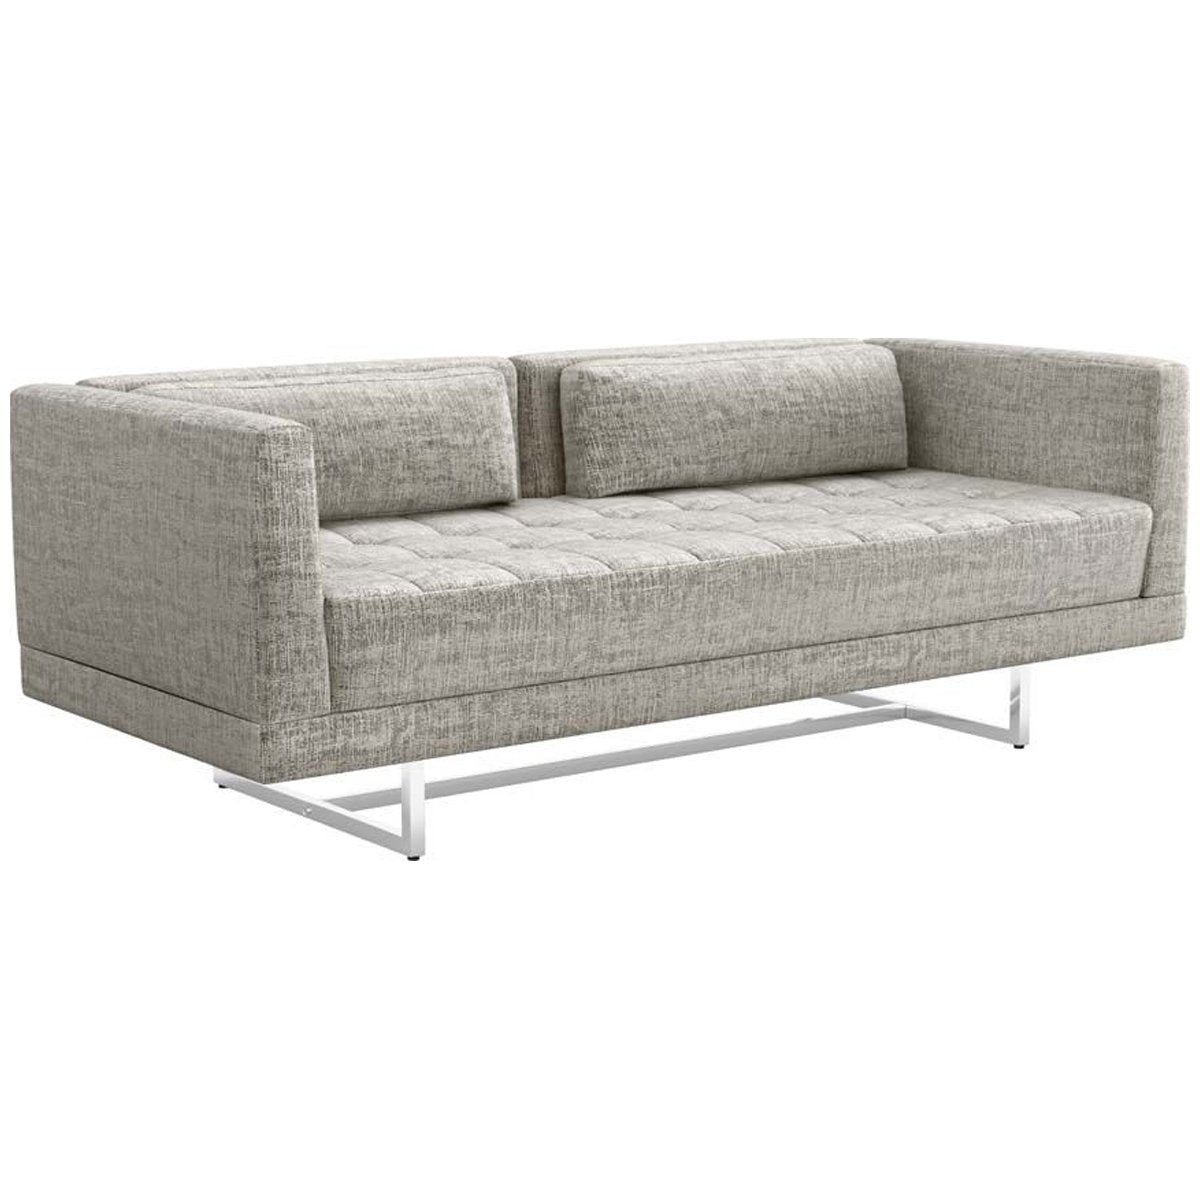 Interlude Home Luca Feather Loveseat